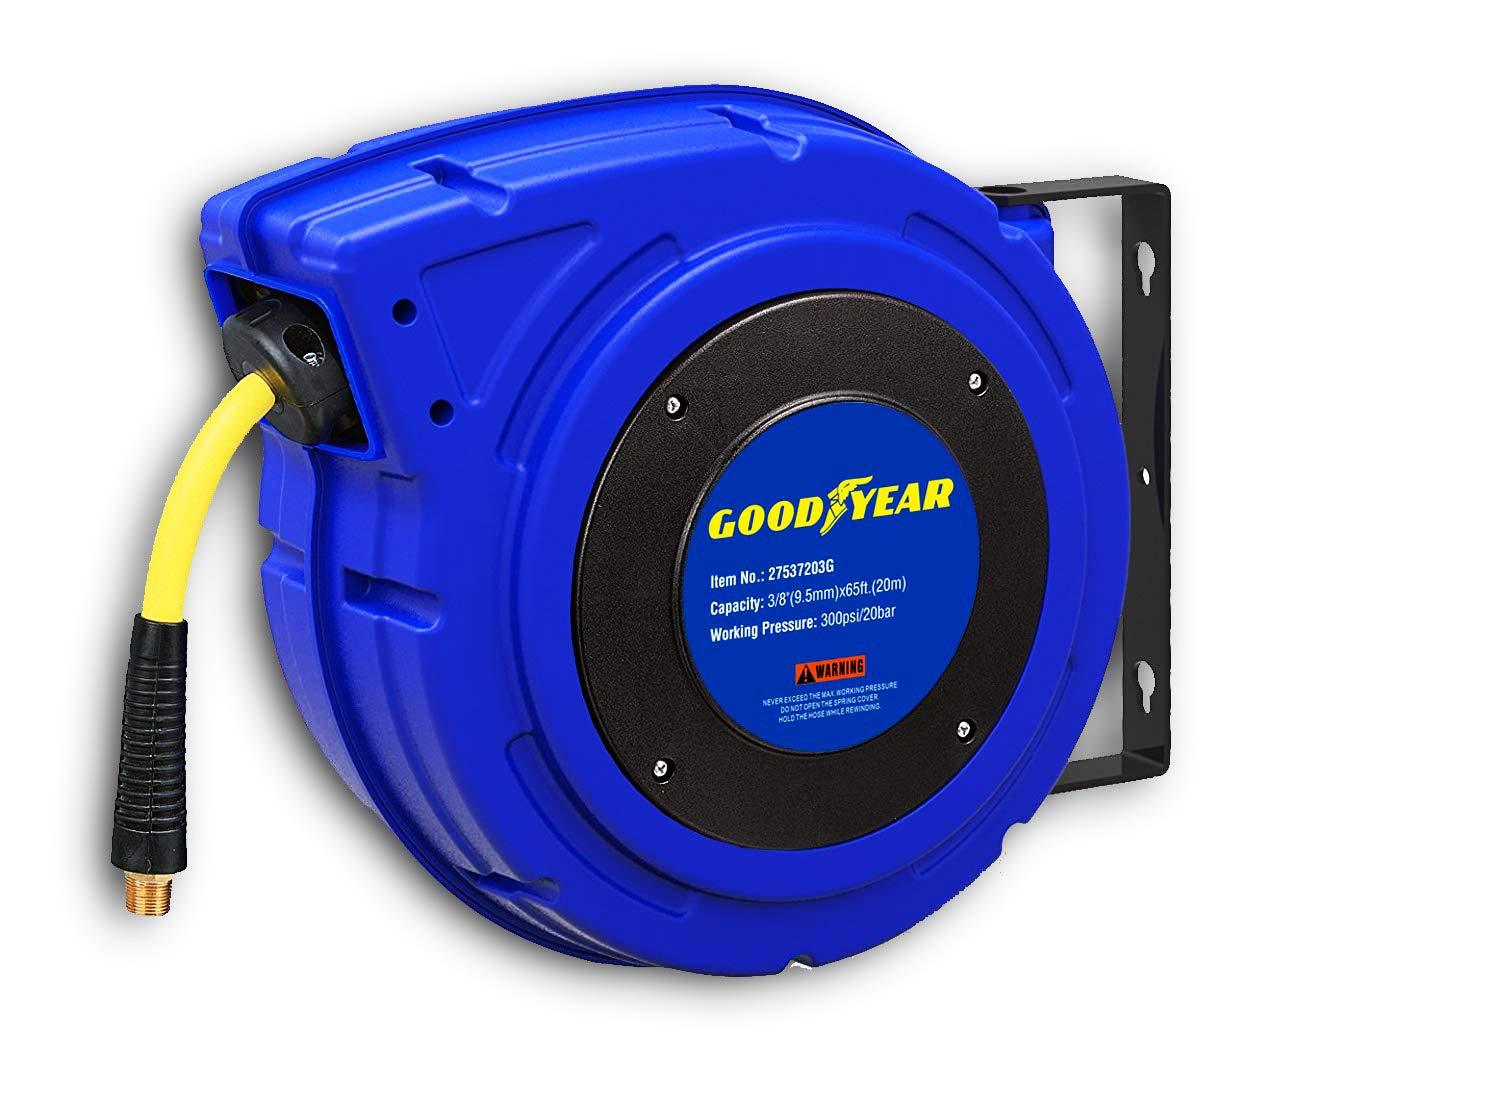 Goodyear Retractable Air Compressor/Water Hose Reel, Max. 300PSI (3/8" x 65 FT) Hybrid Polymer Hose - Great Circle UK